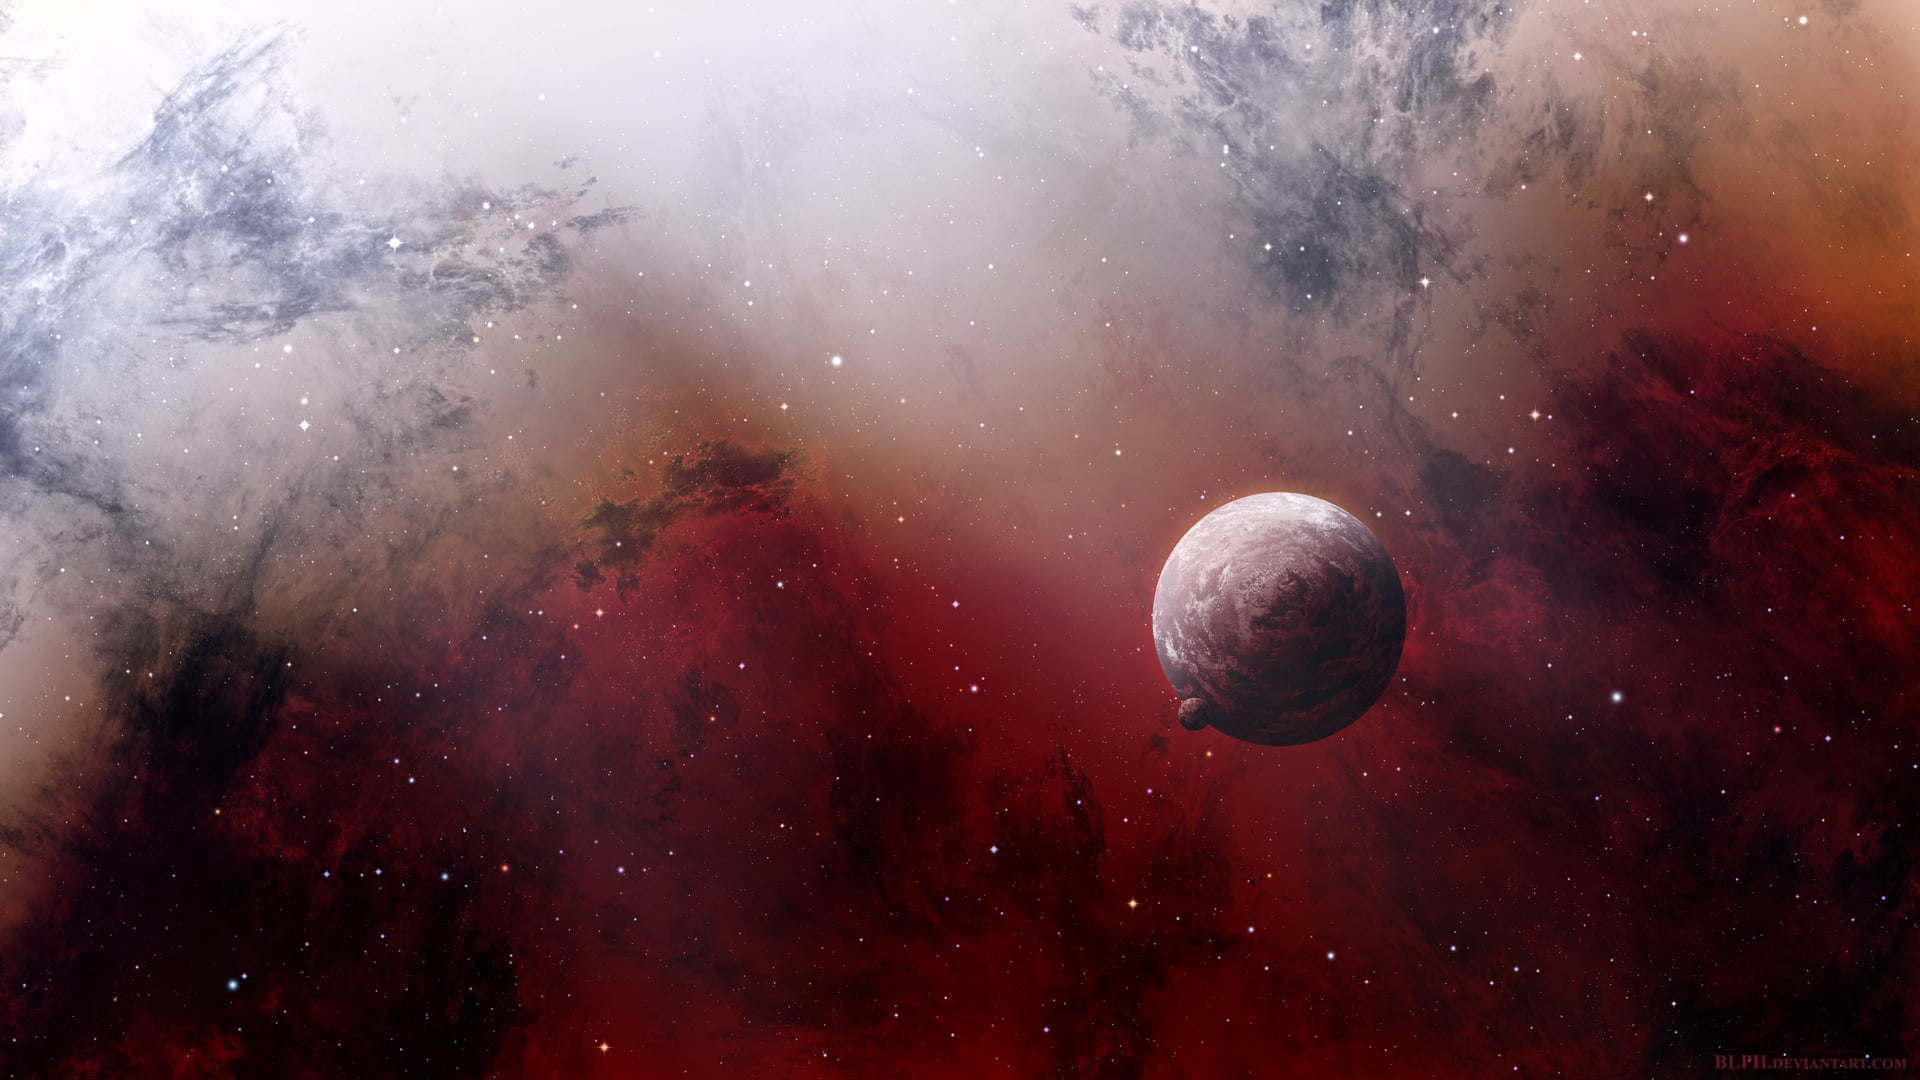 brown planet illustration with red and beige background, space